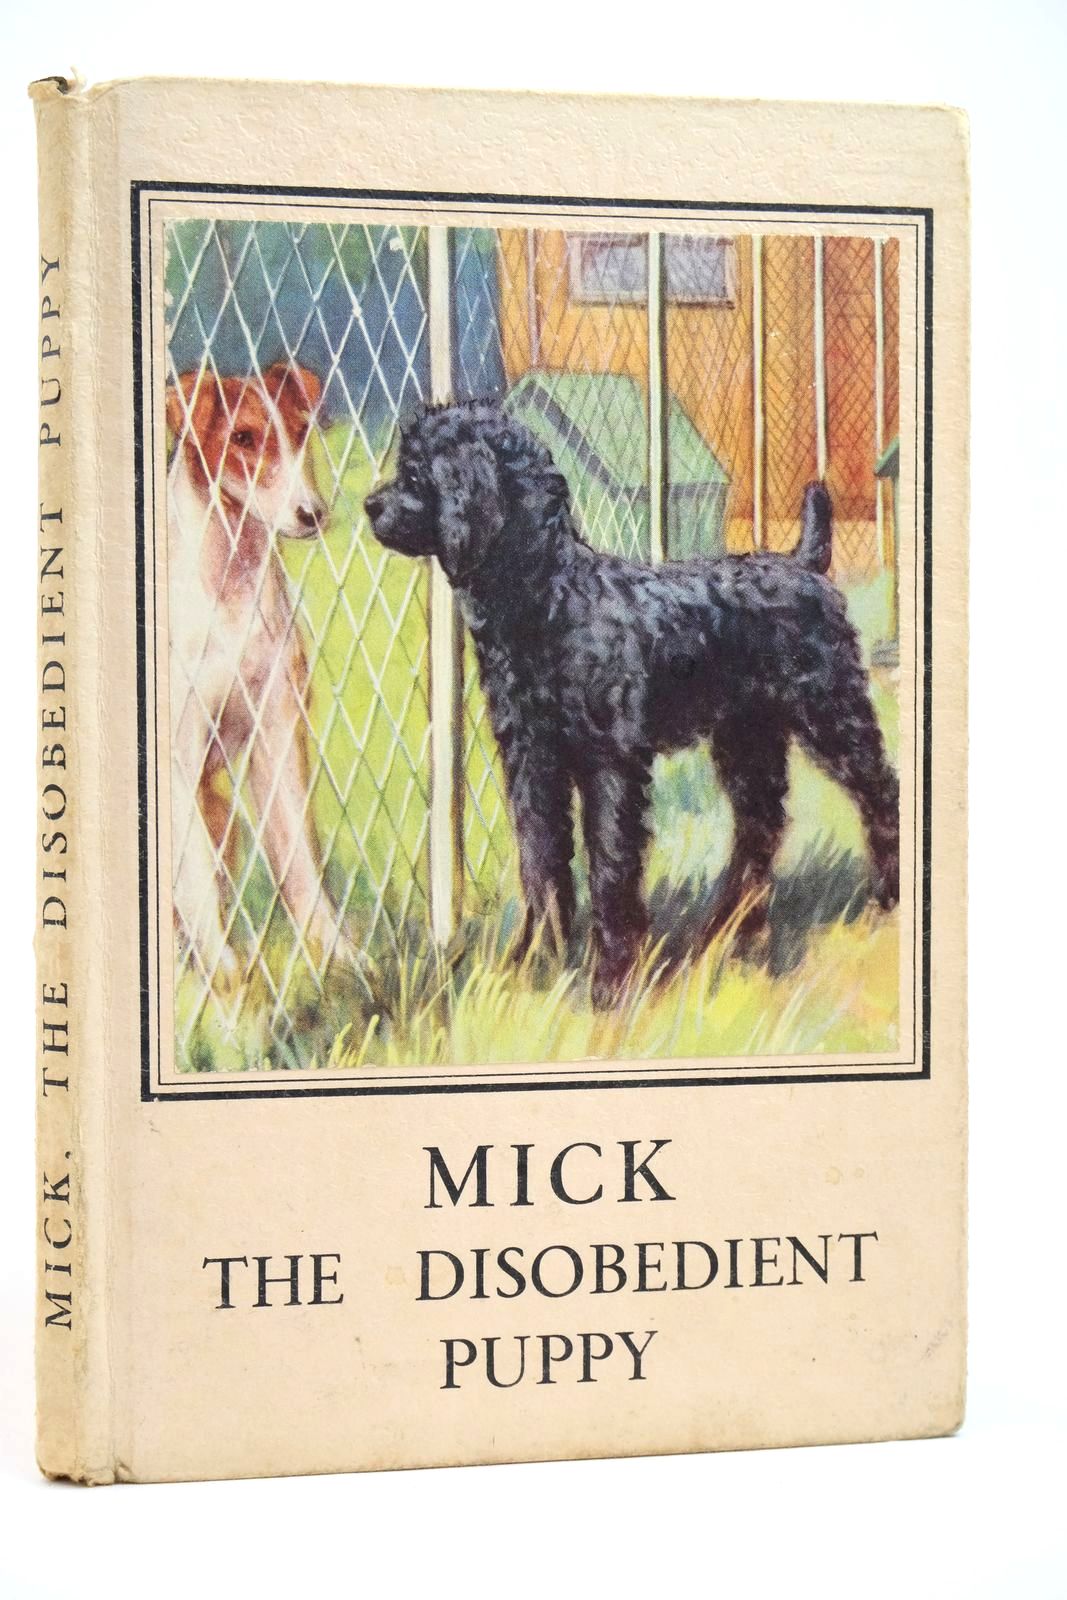 Photo of MICK THE DISOBEDIENT PUPPY written by Barr, Noel illustrated by Hickling, P.B. published by Wills & Hepworth Ltd. (STOCK CODE: 2135156)  for sale by Stella & Rose's Books